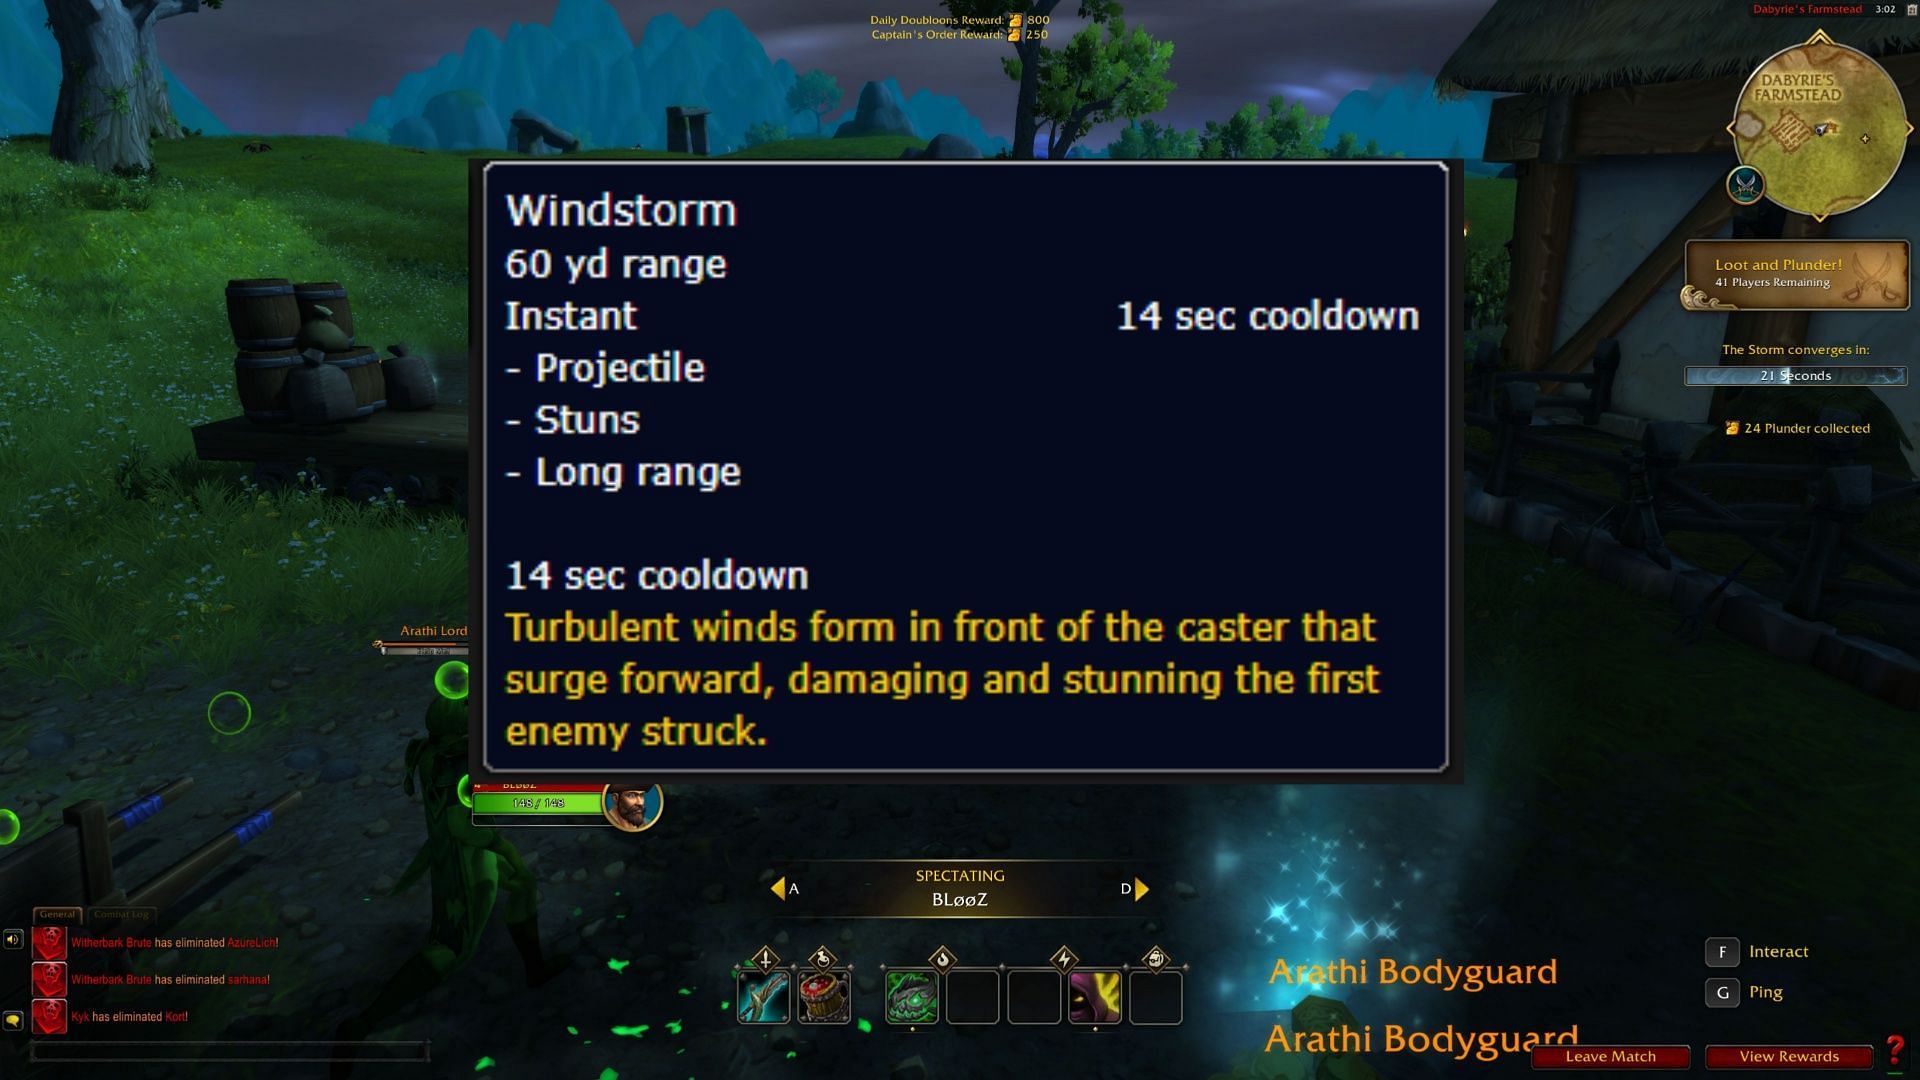 Windstorm in WoW (Image via Blizzard Entertainment)